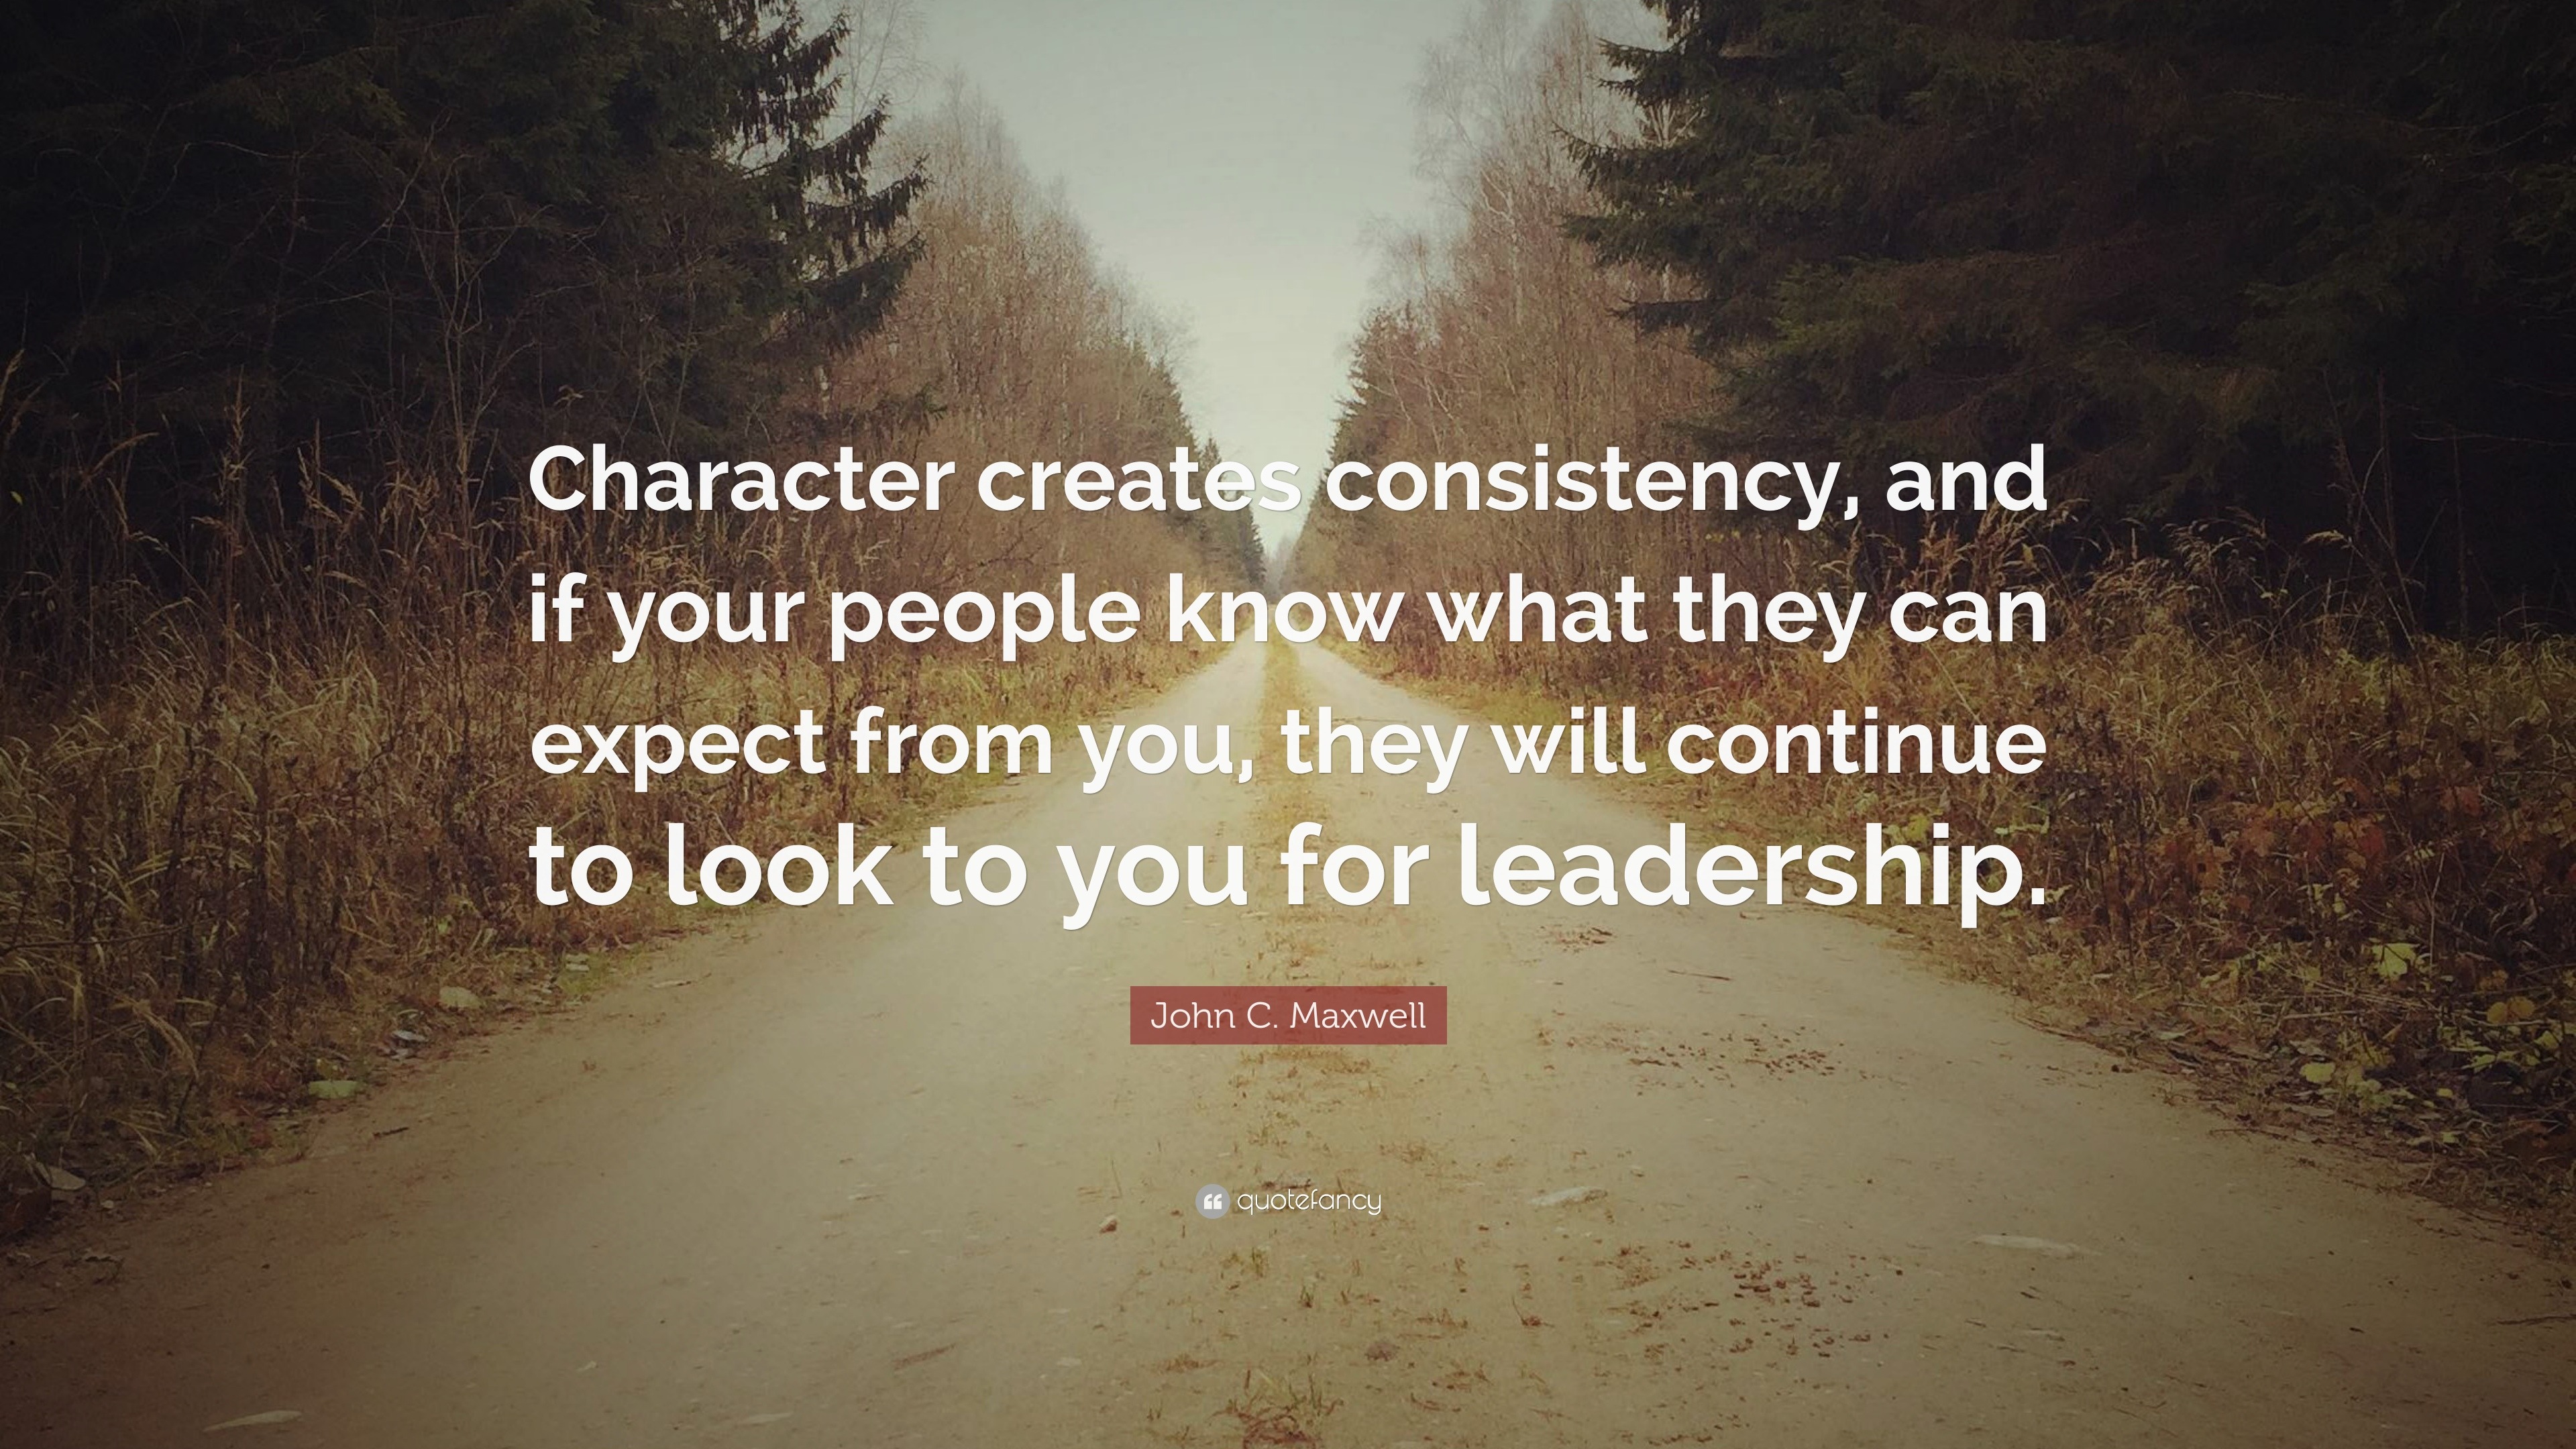 John C. Maxwell Quote: “Character creates consistency, and if your